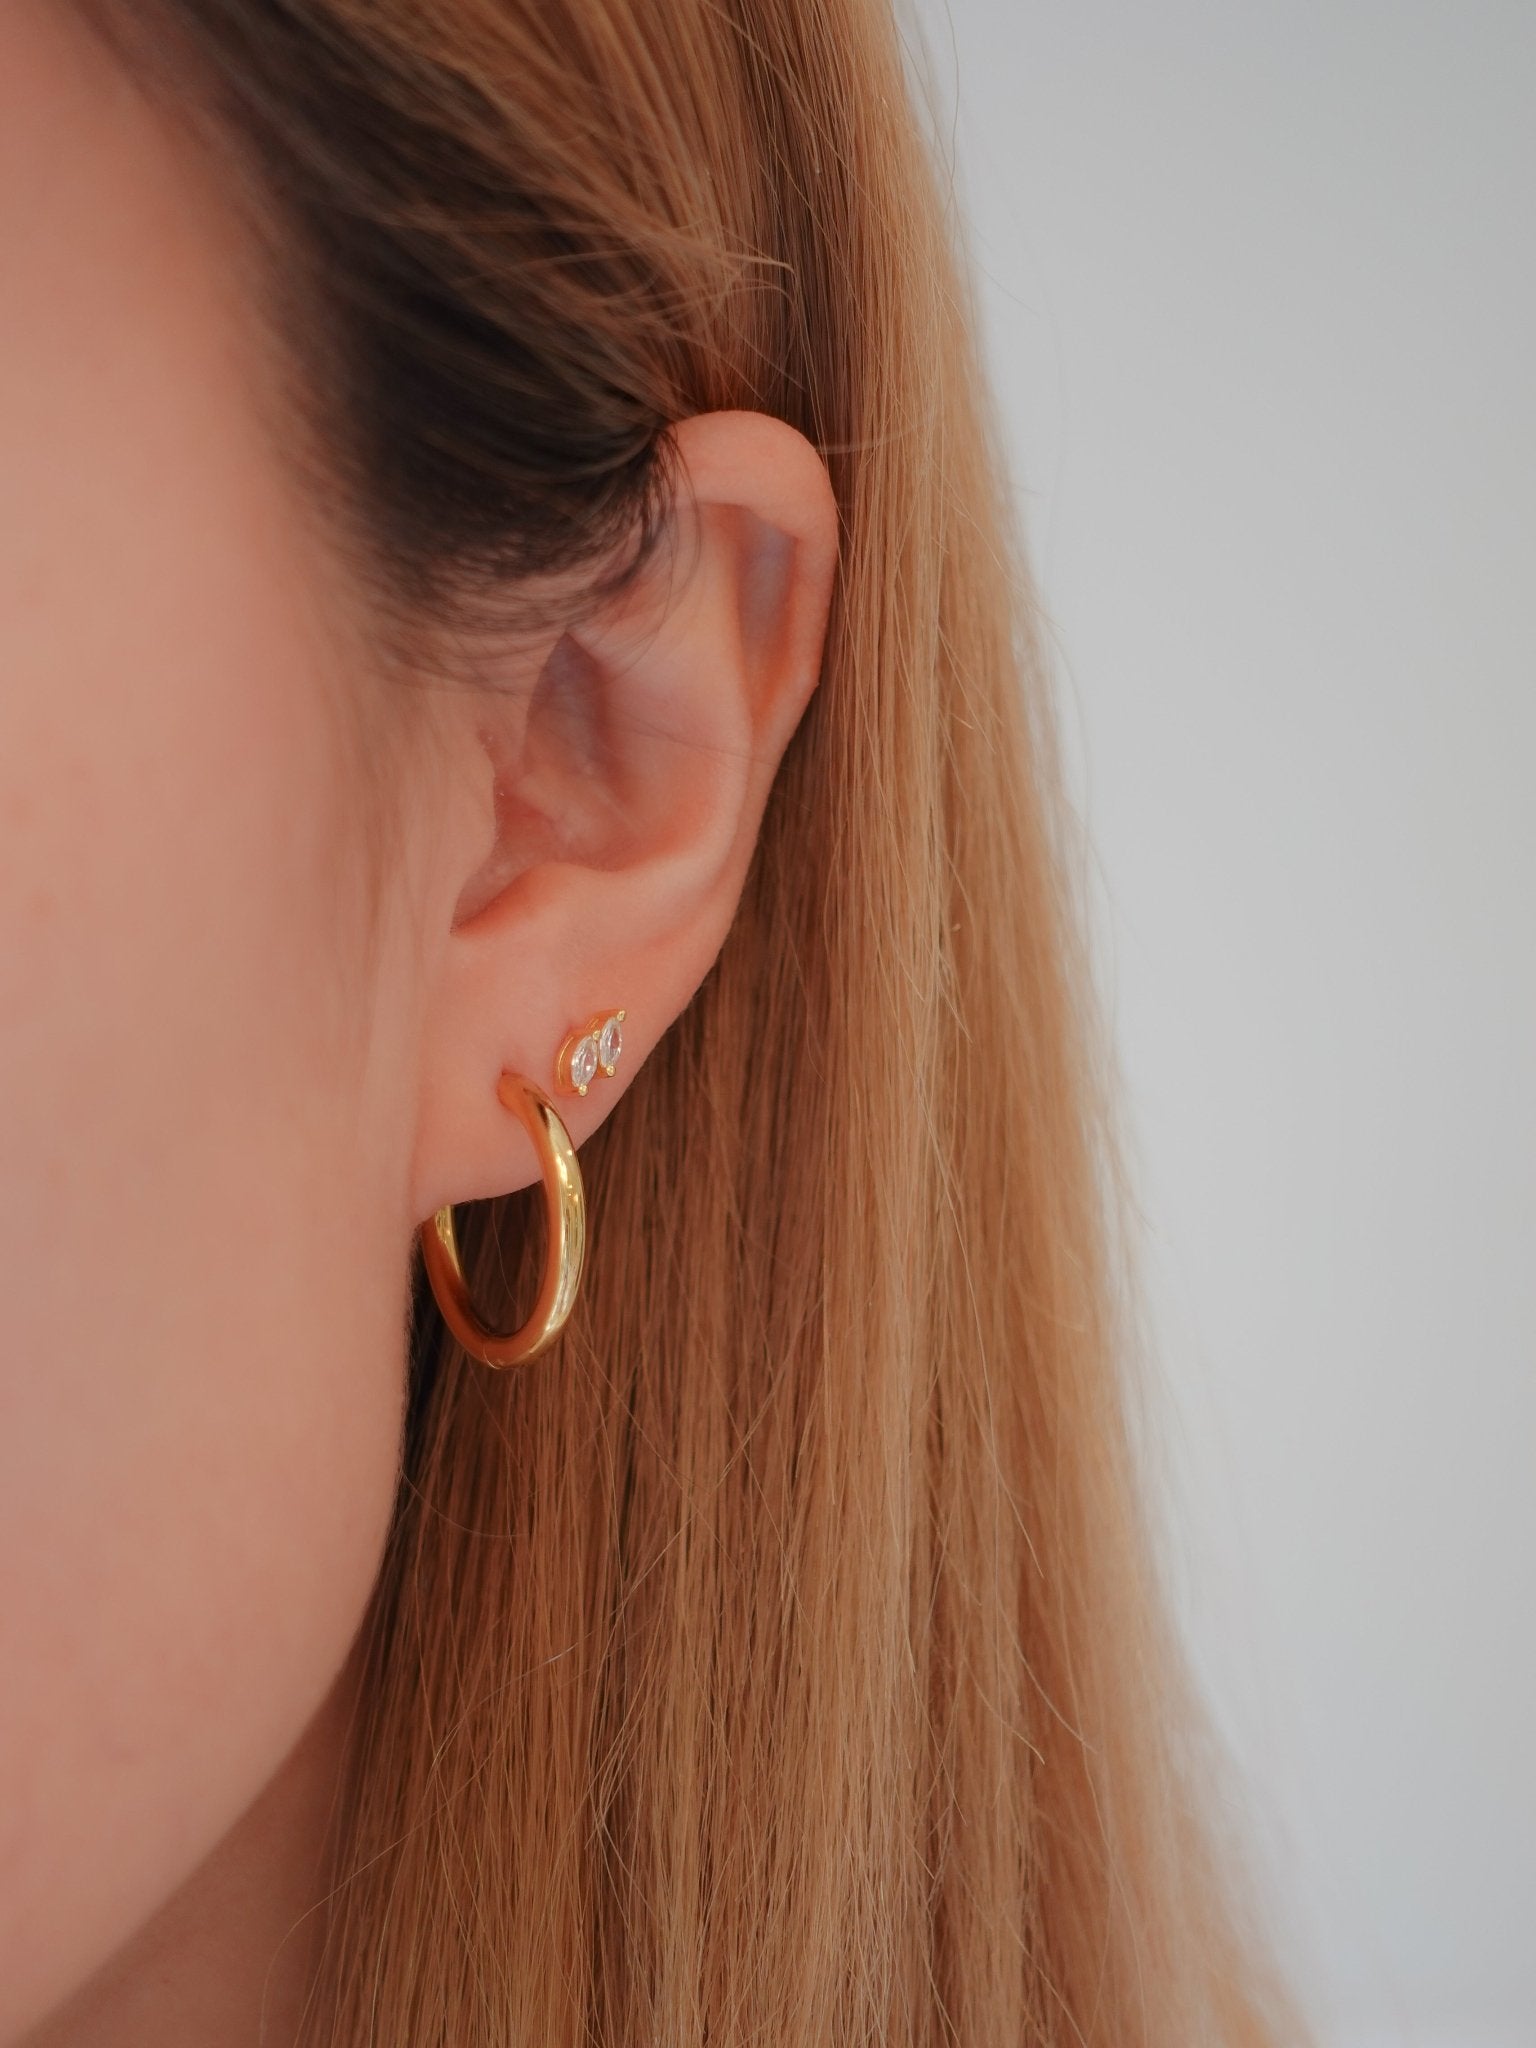 Mini Everyday Seamless Gold Hoops (2cm) - Flaire & Co.